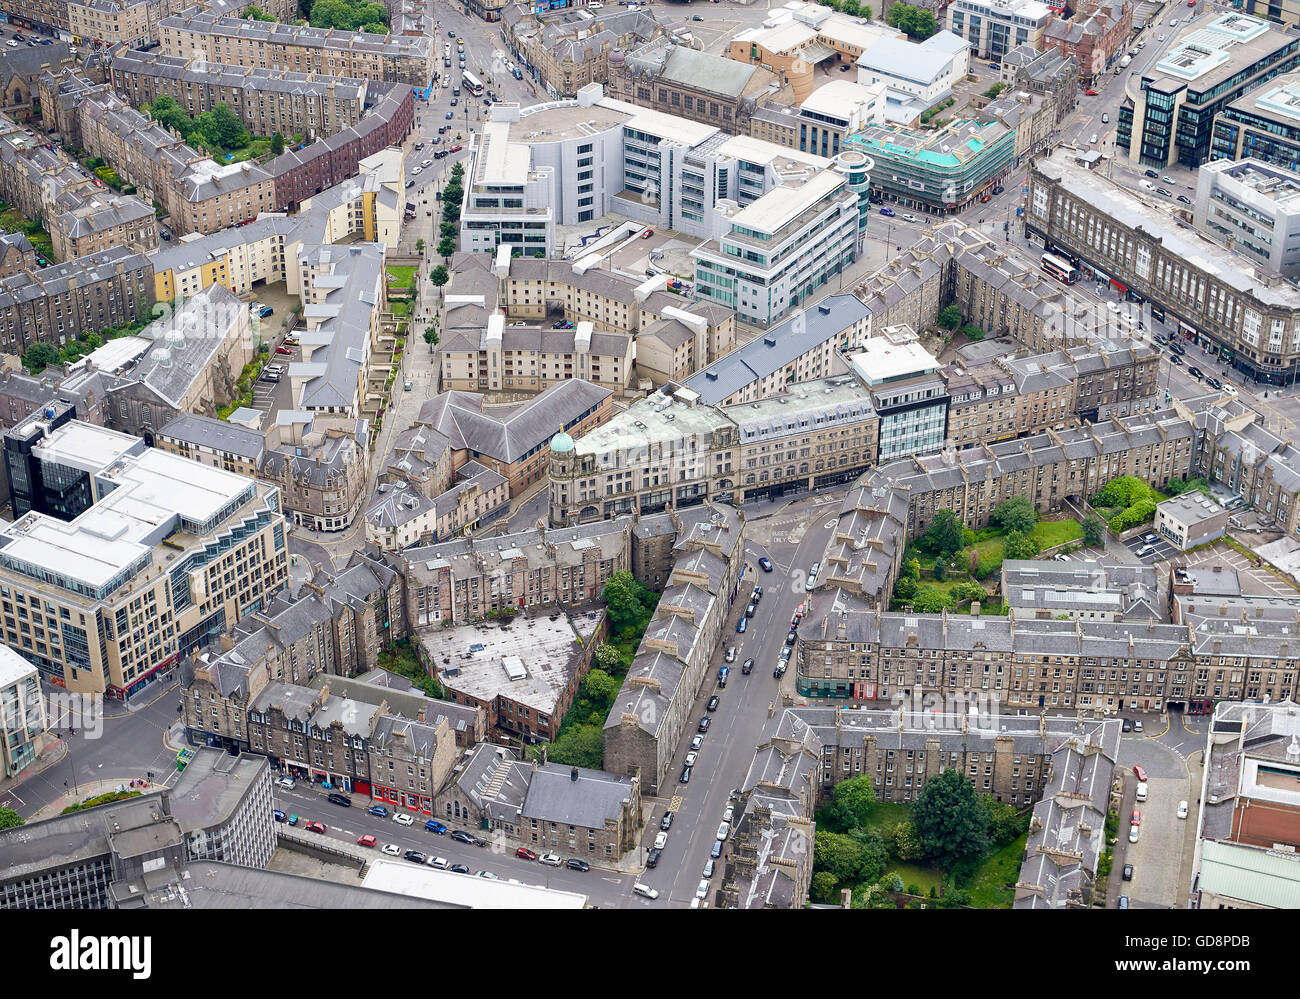 Edinburgh City Centre from the air, looking over the Old Town and financial district, Central Scotland, UK Stock Photo